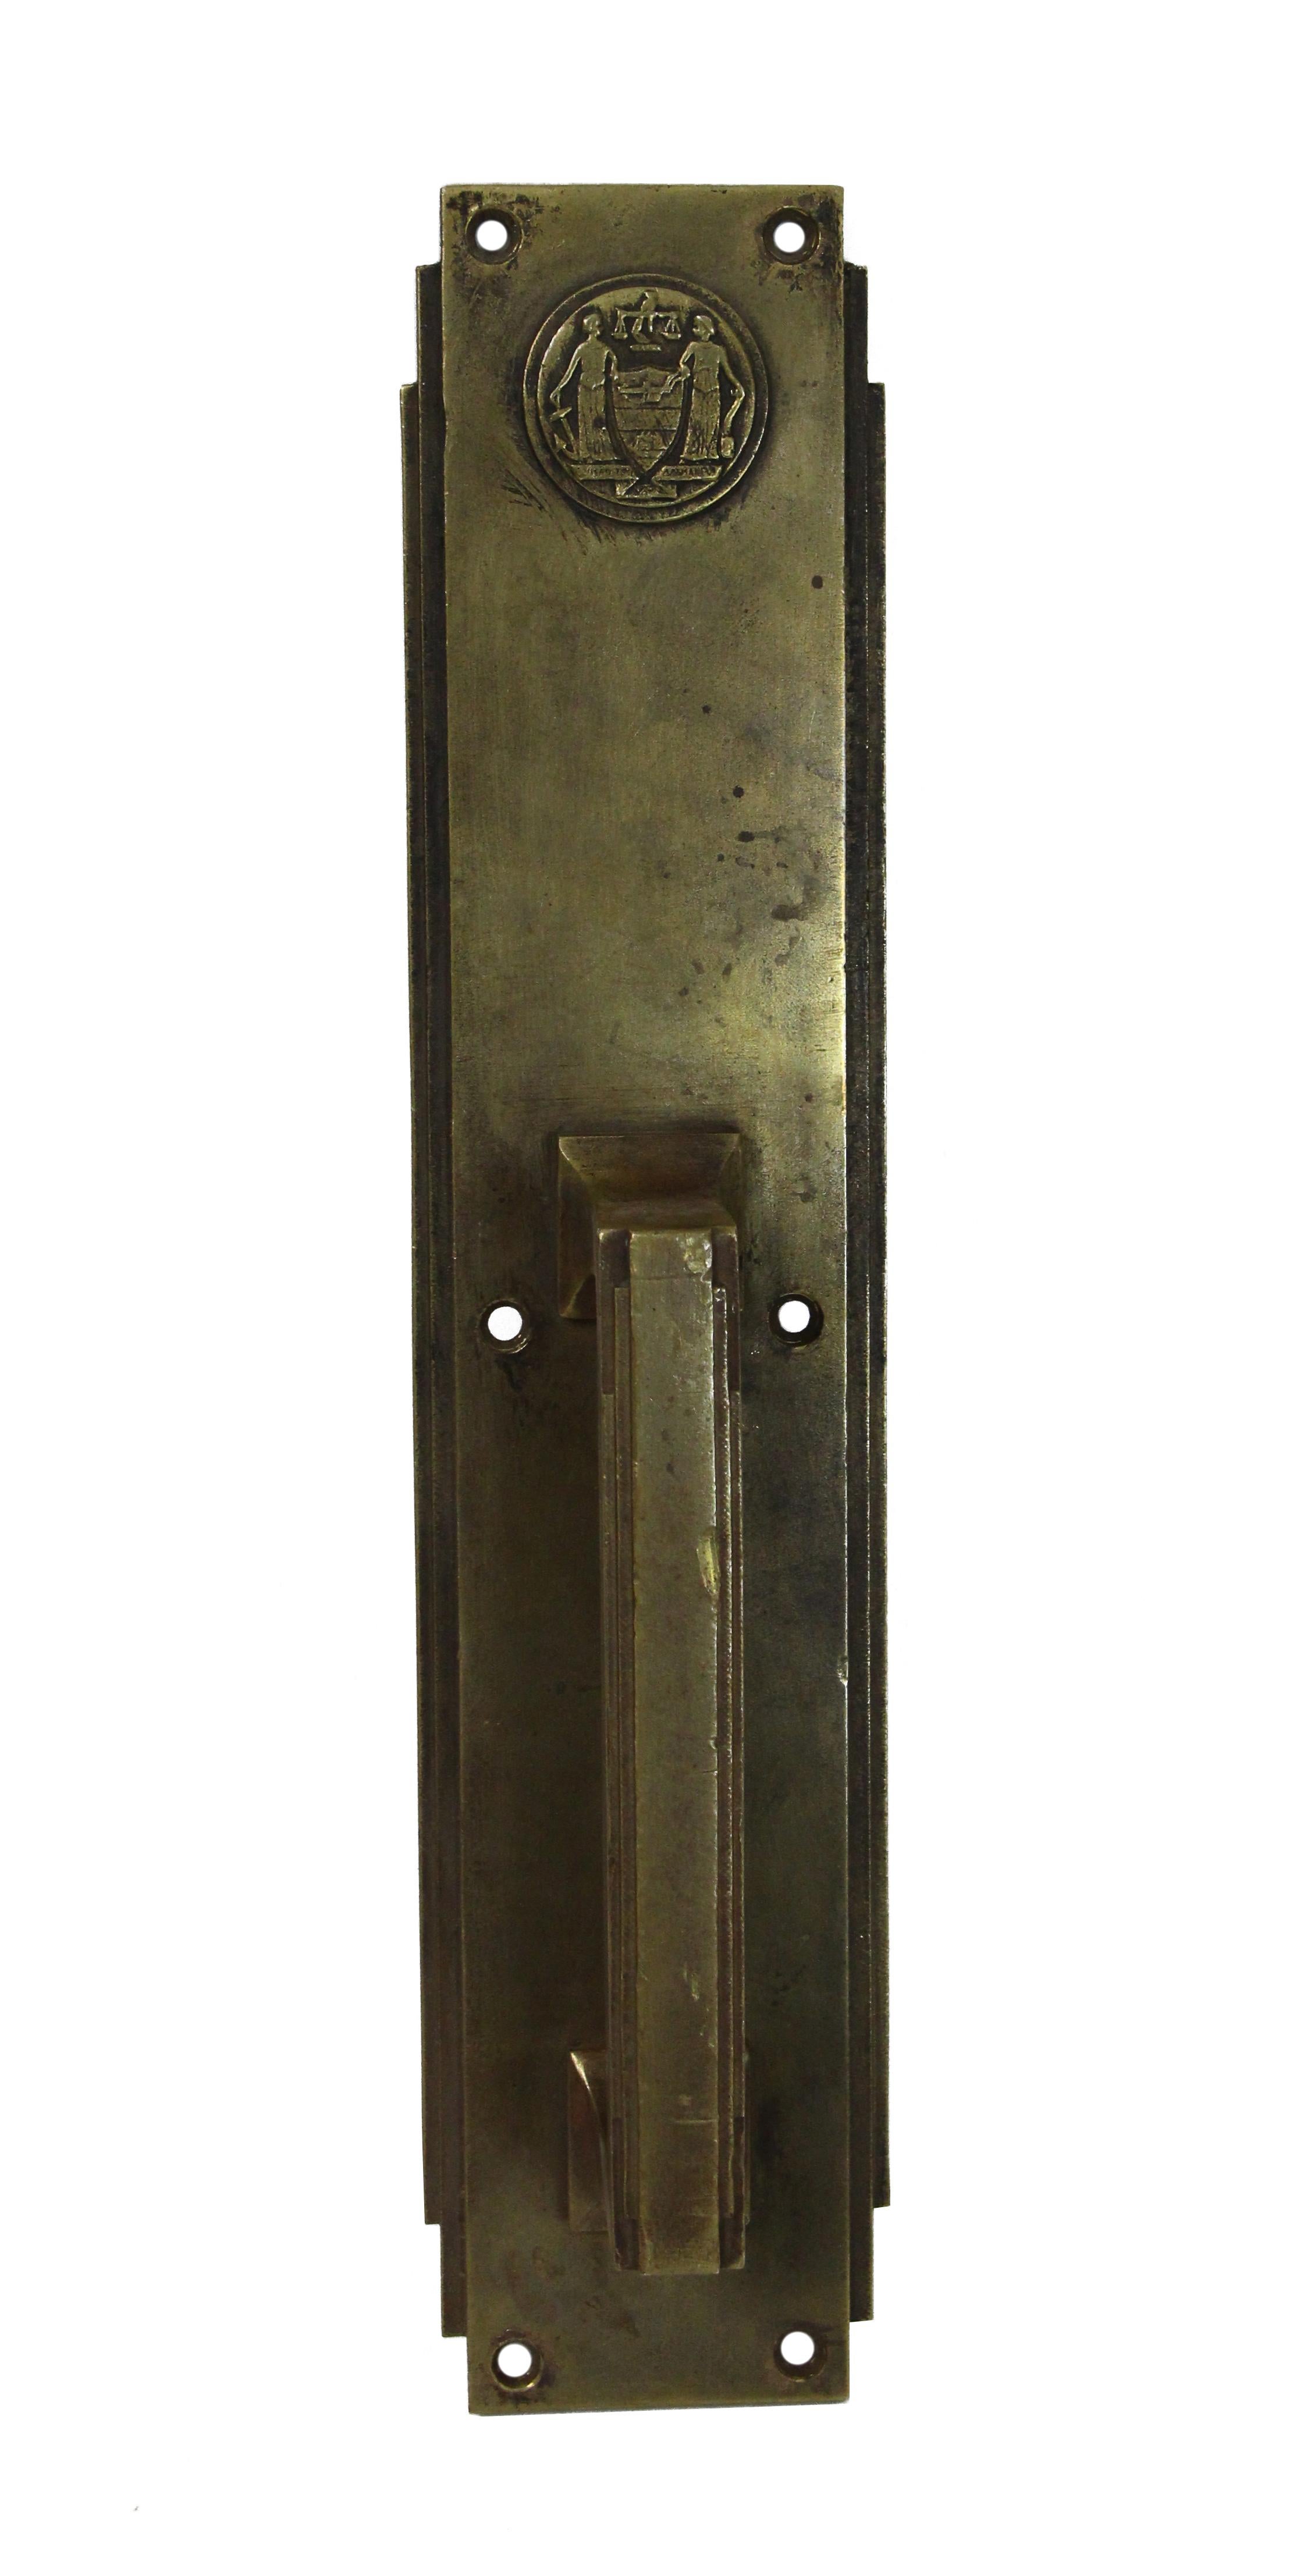 1931 Corbin signed bronze door pull and push plate set with emblems salvaged from the Philadelphia Civic Centre. The push plate has the original lock. This pair is made for the front and back of one swinging door. Salvaged by Olde Good Things from